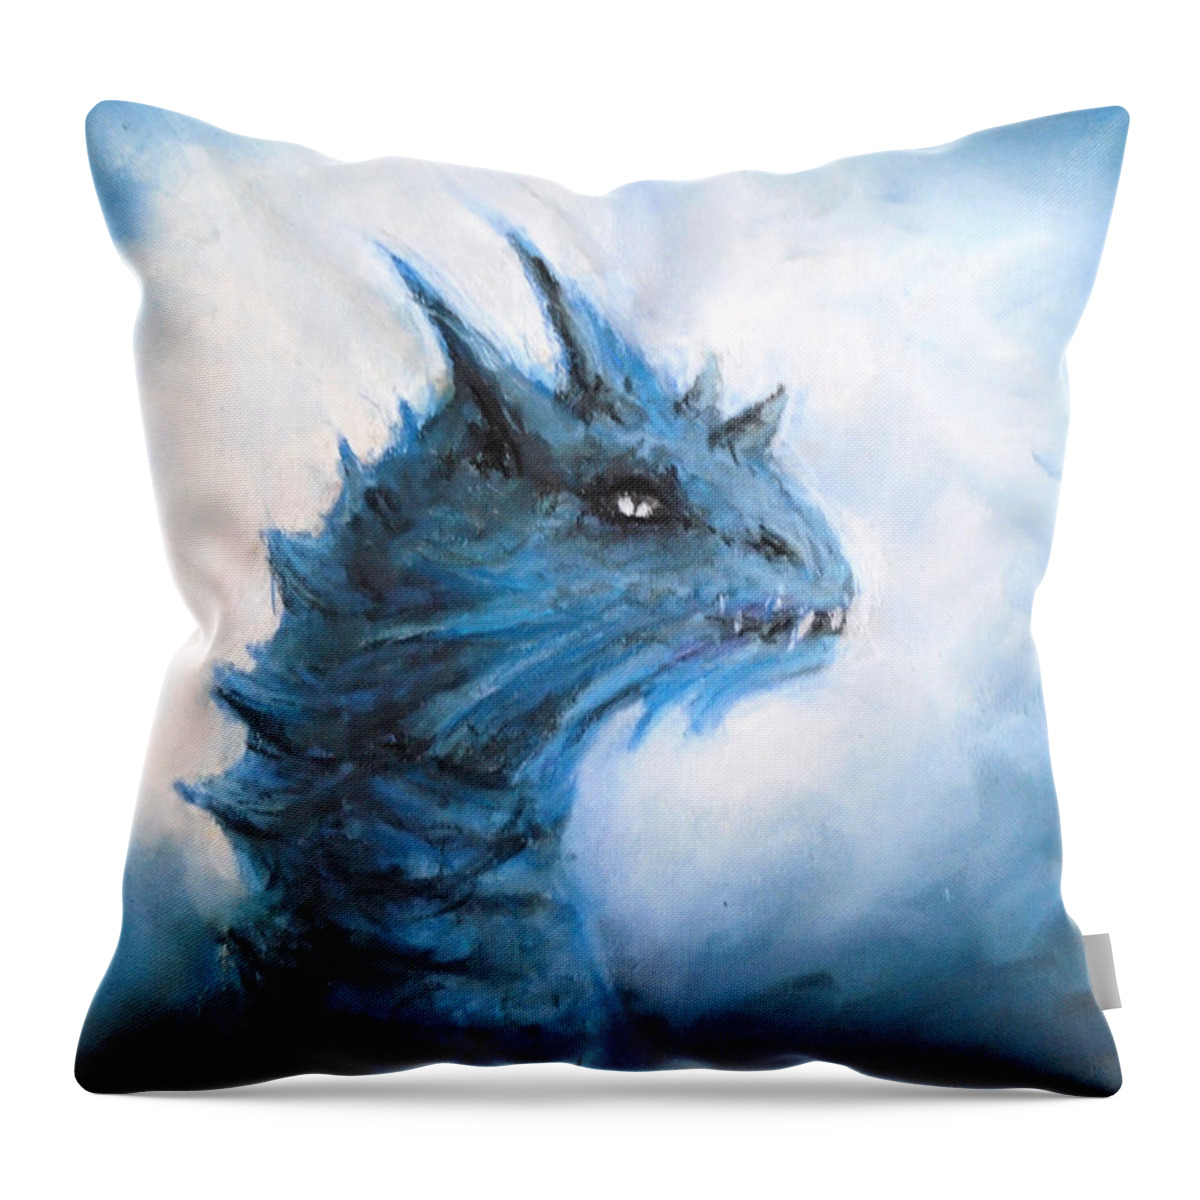 Dragon Throw Pillow featuring the painting Dragon's Sight by Jen Shearer